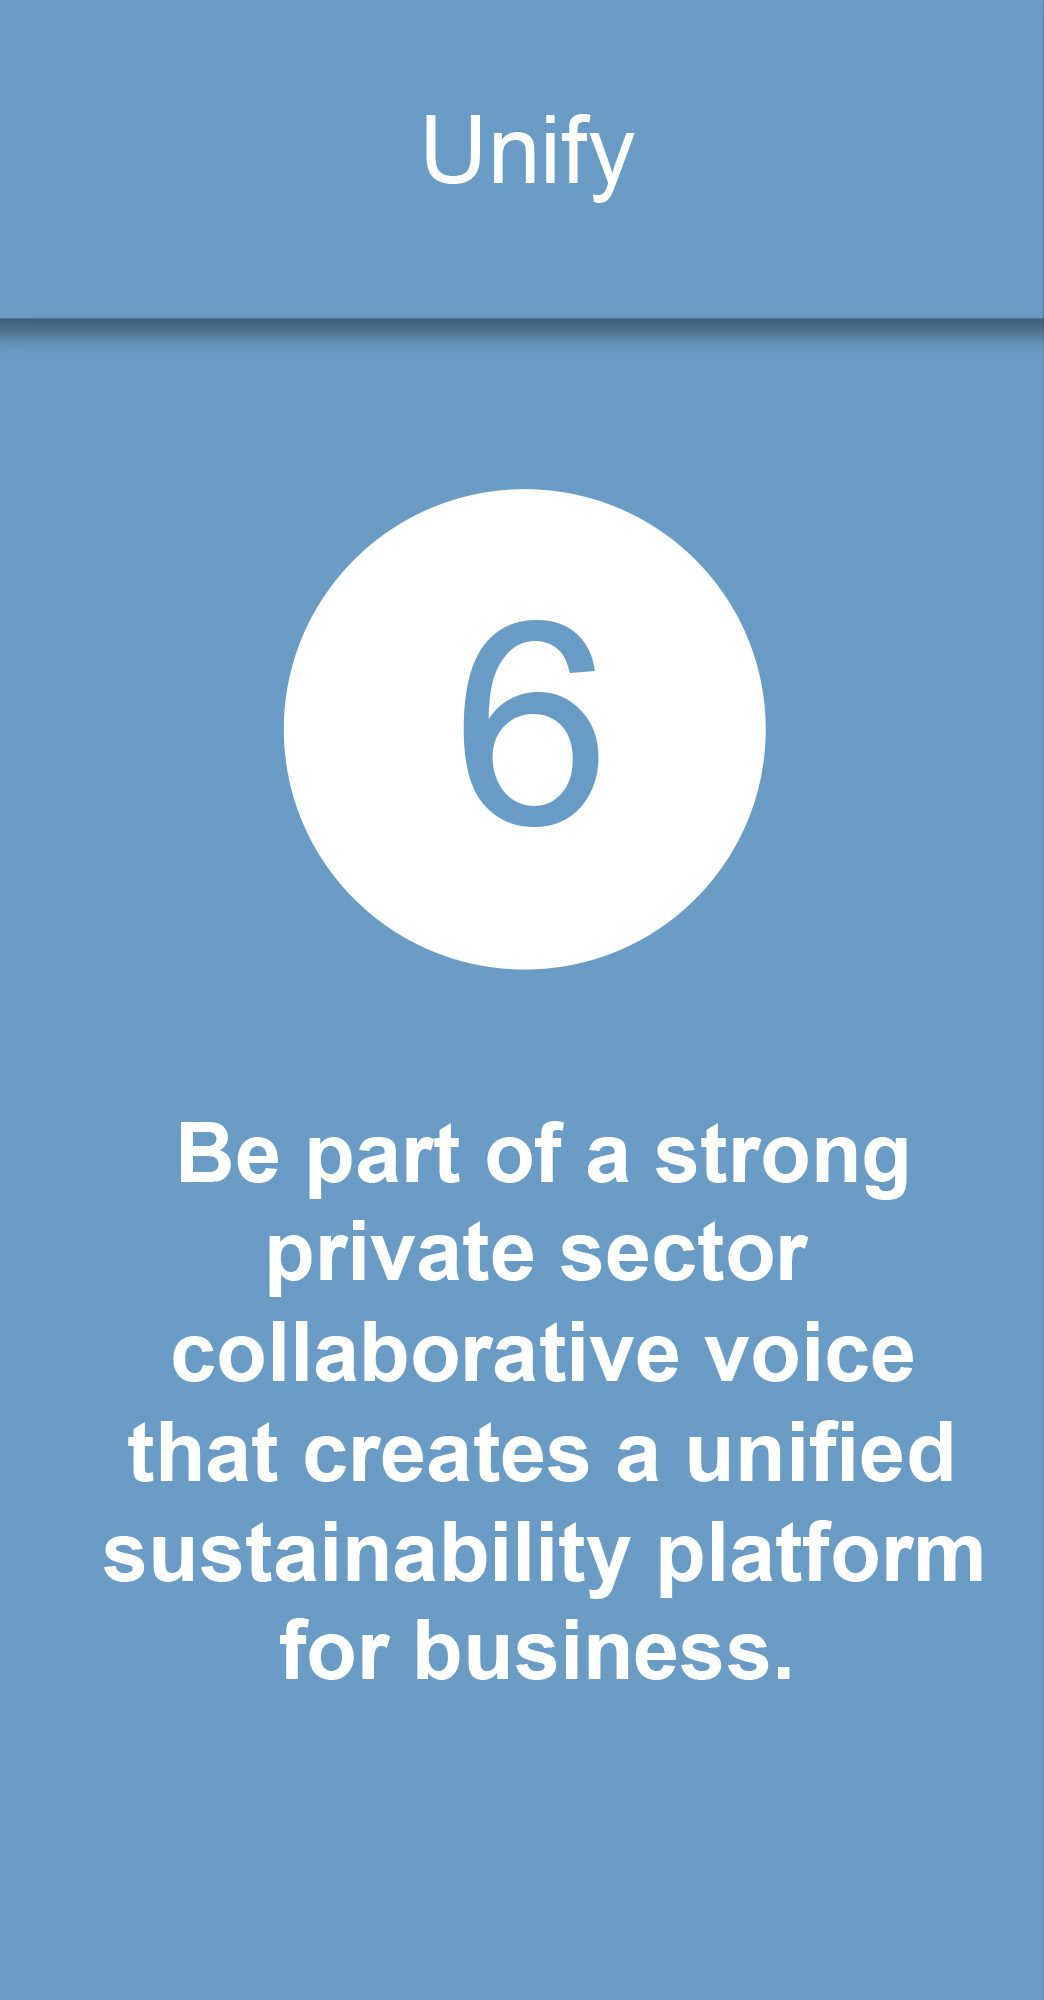 Be part of a strong private sector collaborative voice that creates a unified sustainability platform for business.